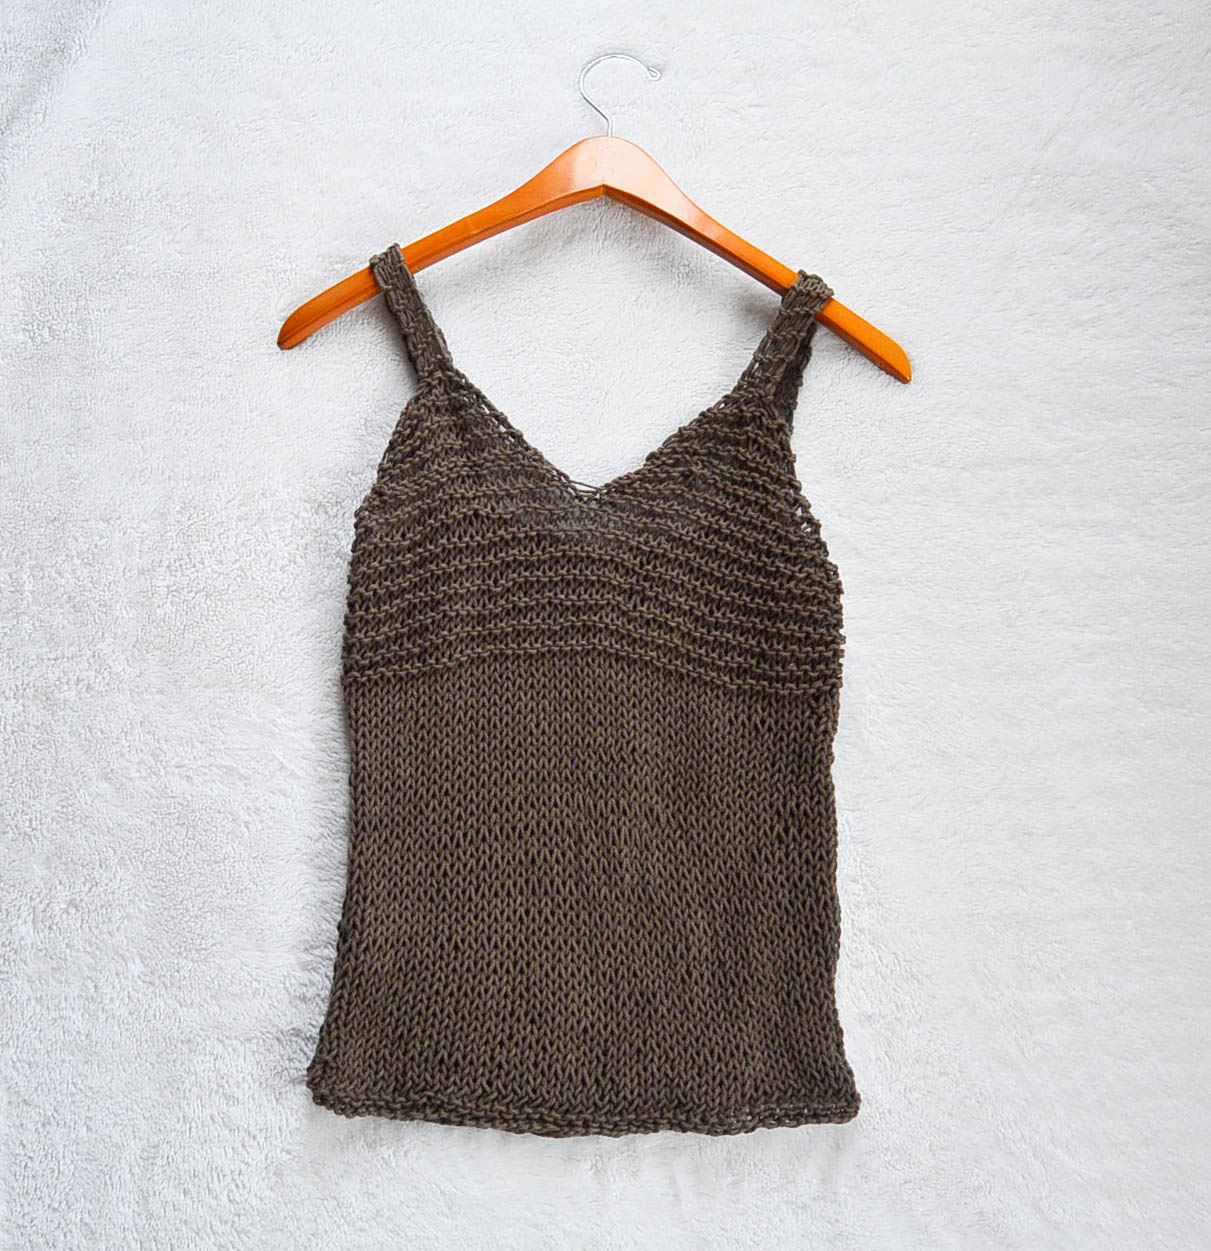 Simple Cocoa Knit Sleeveless Top Pattern – Mama In A Stitch